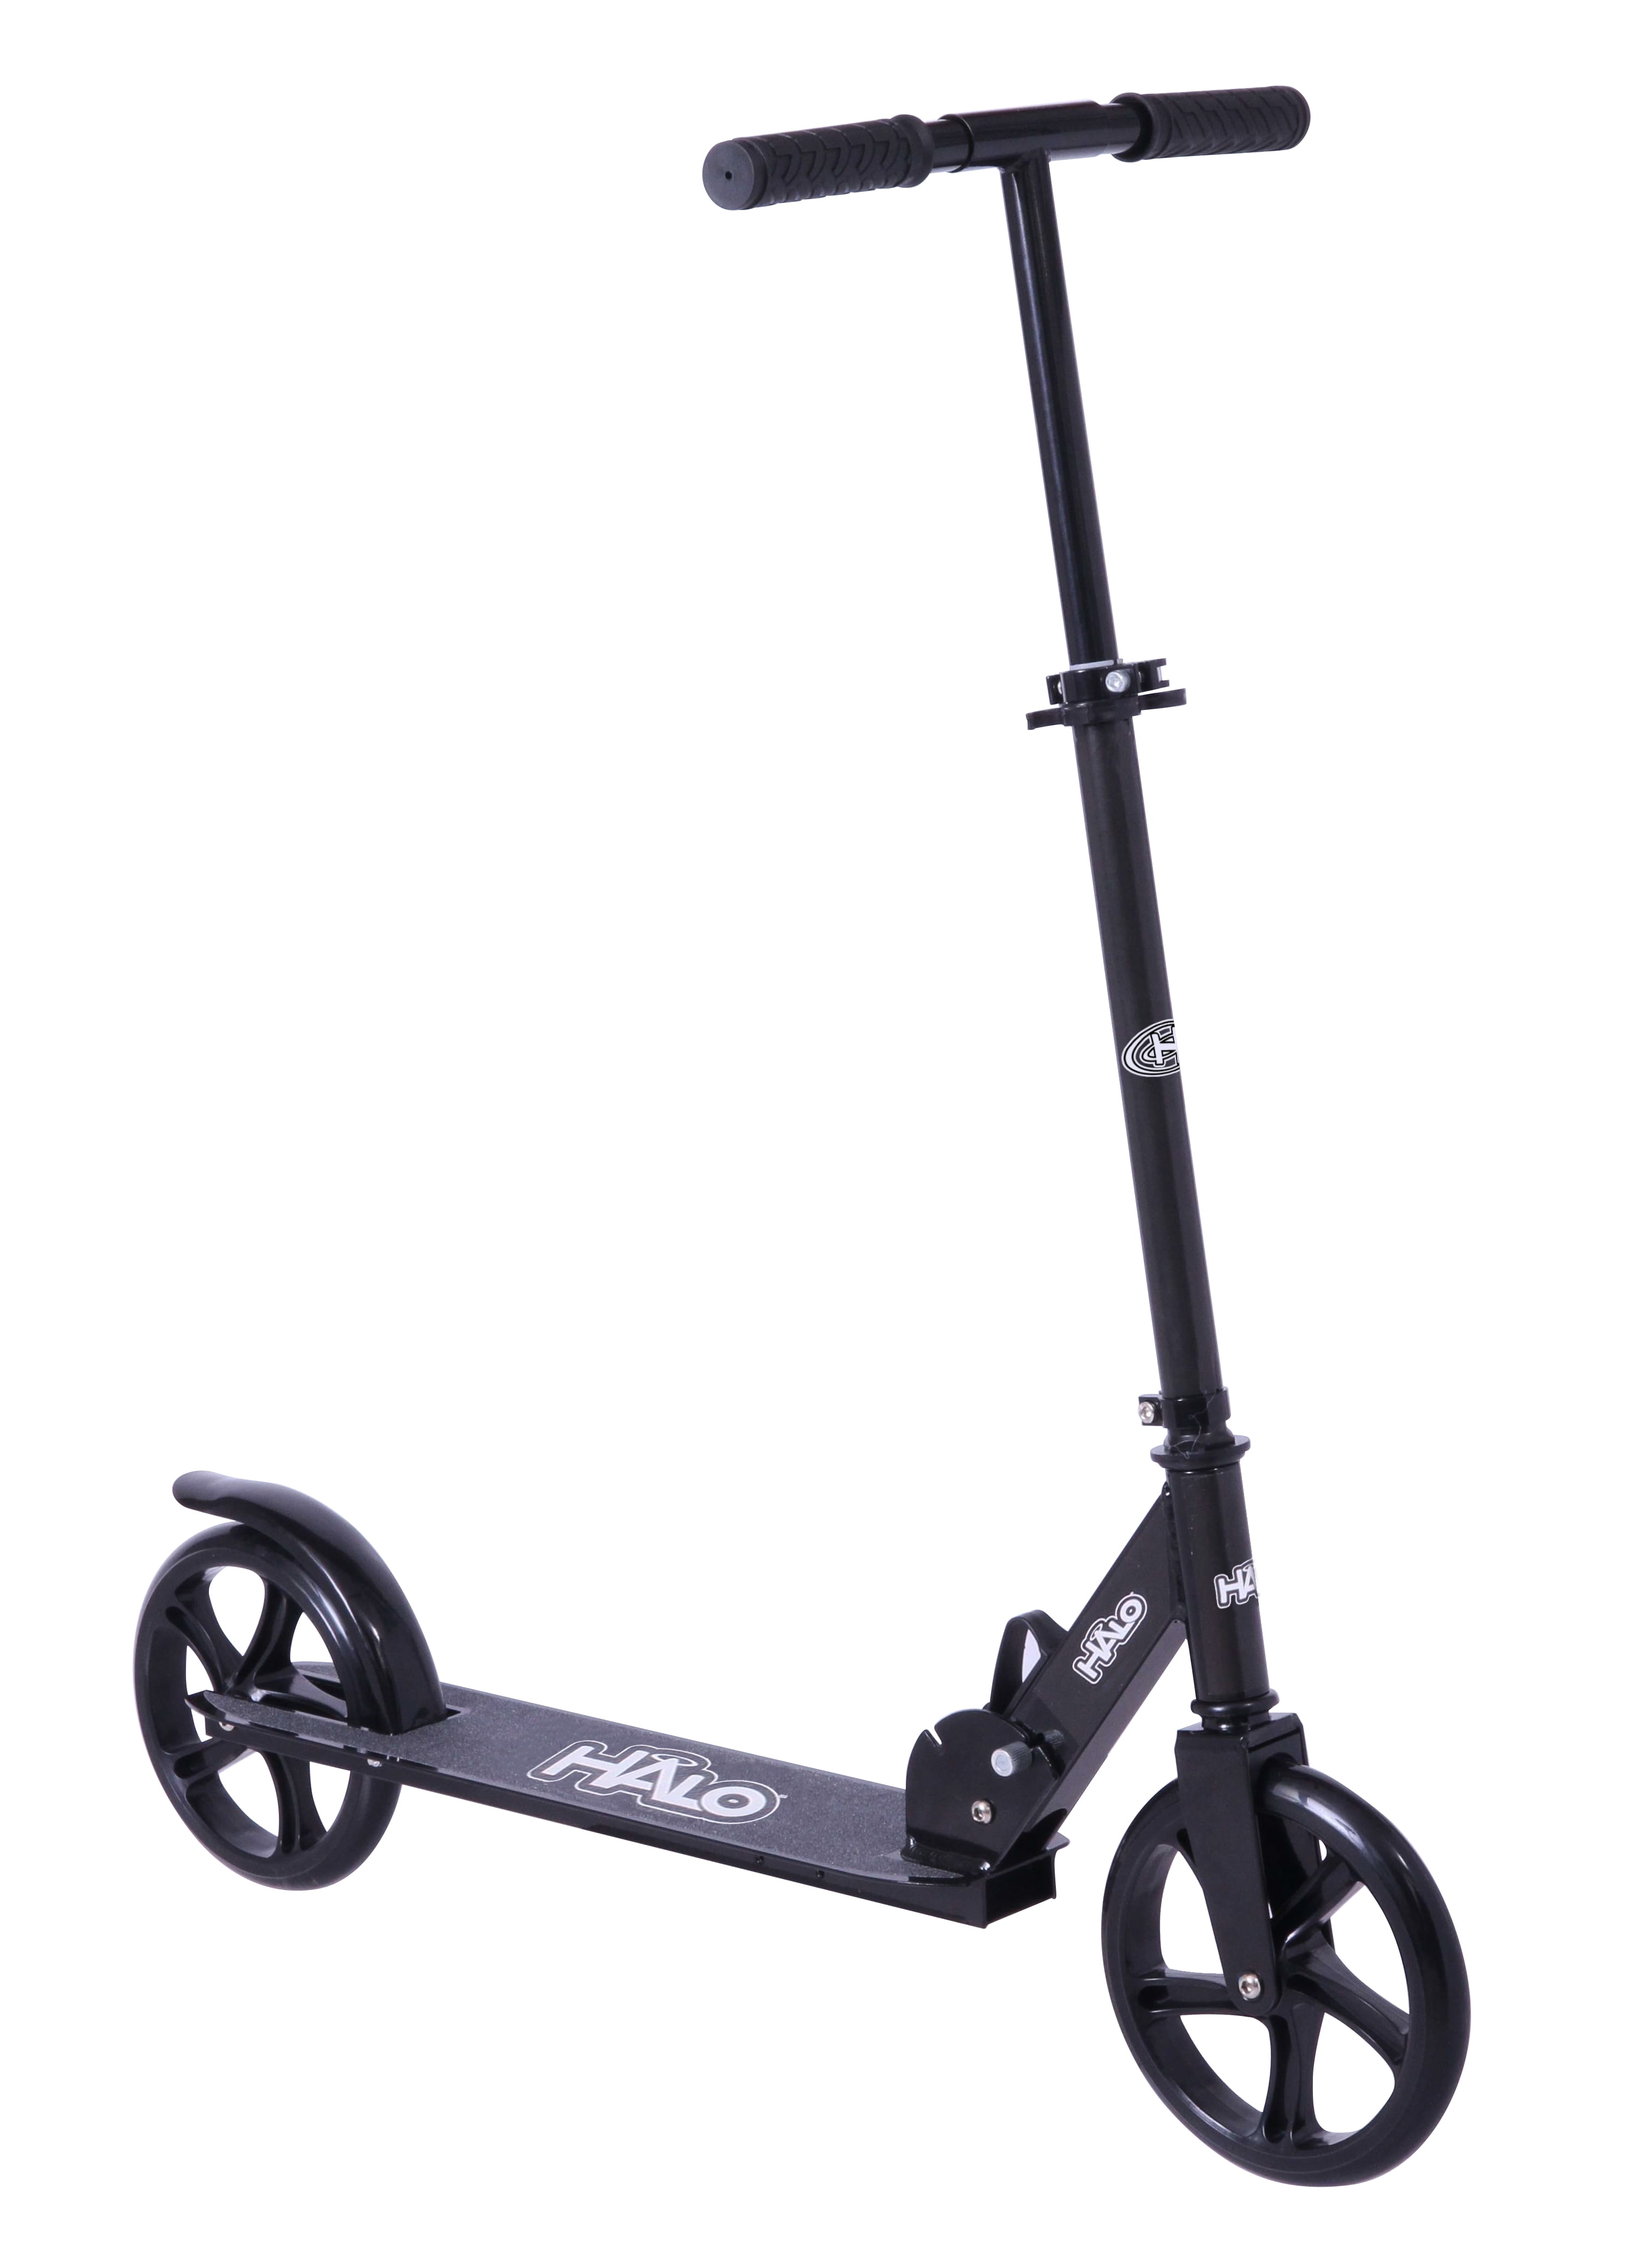 Black HALO Supreme Big Wheel Scooter Height A Foldable Rise Above the rest 